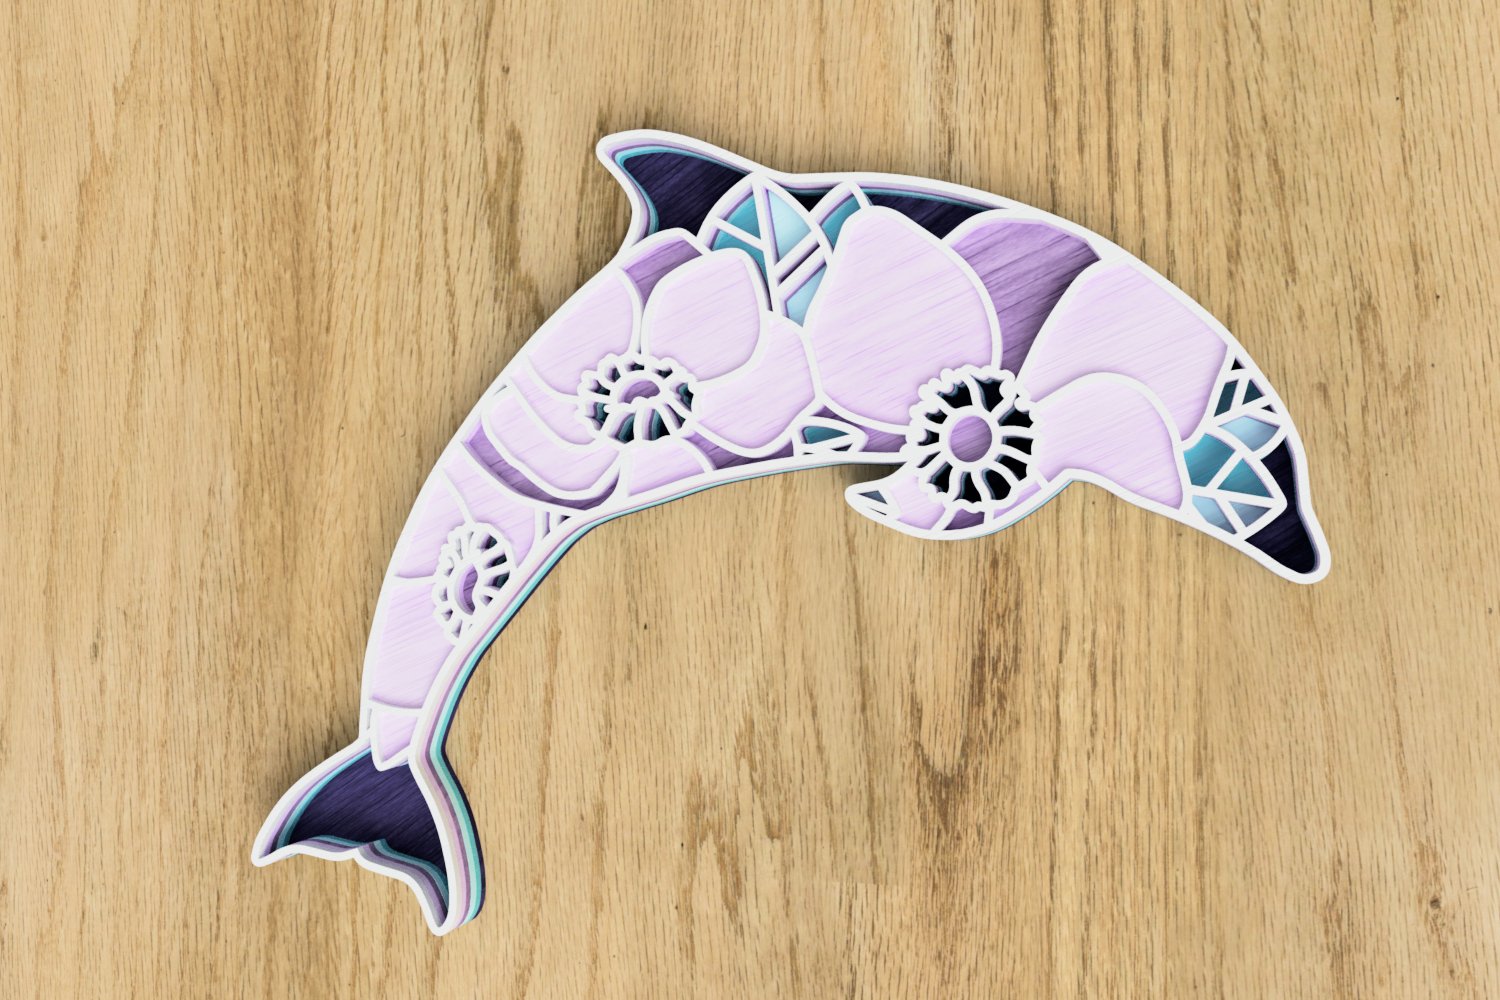 Paper cut out of a dolphin on a wooden surface.